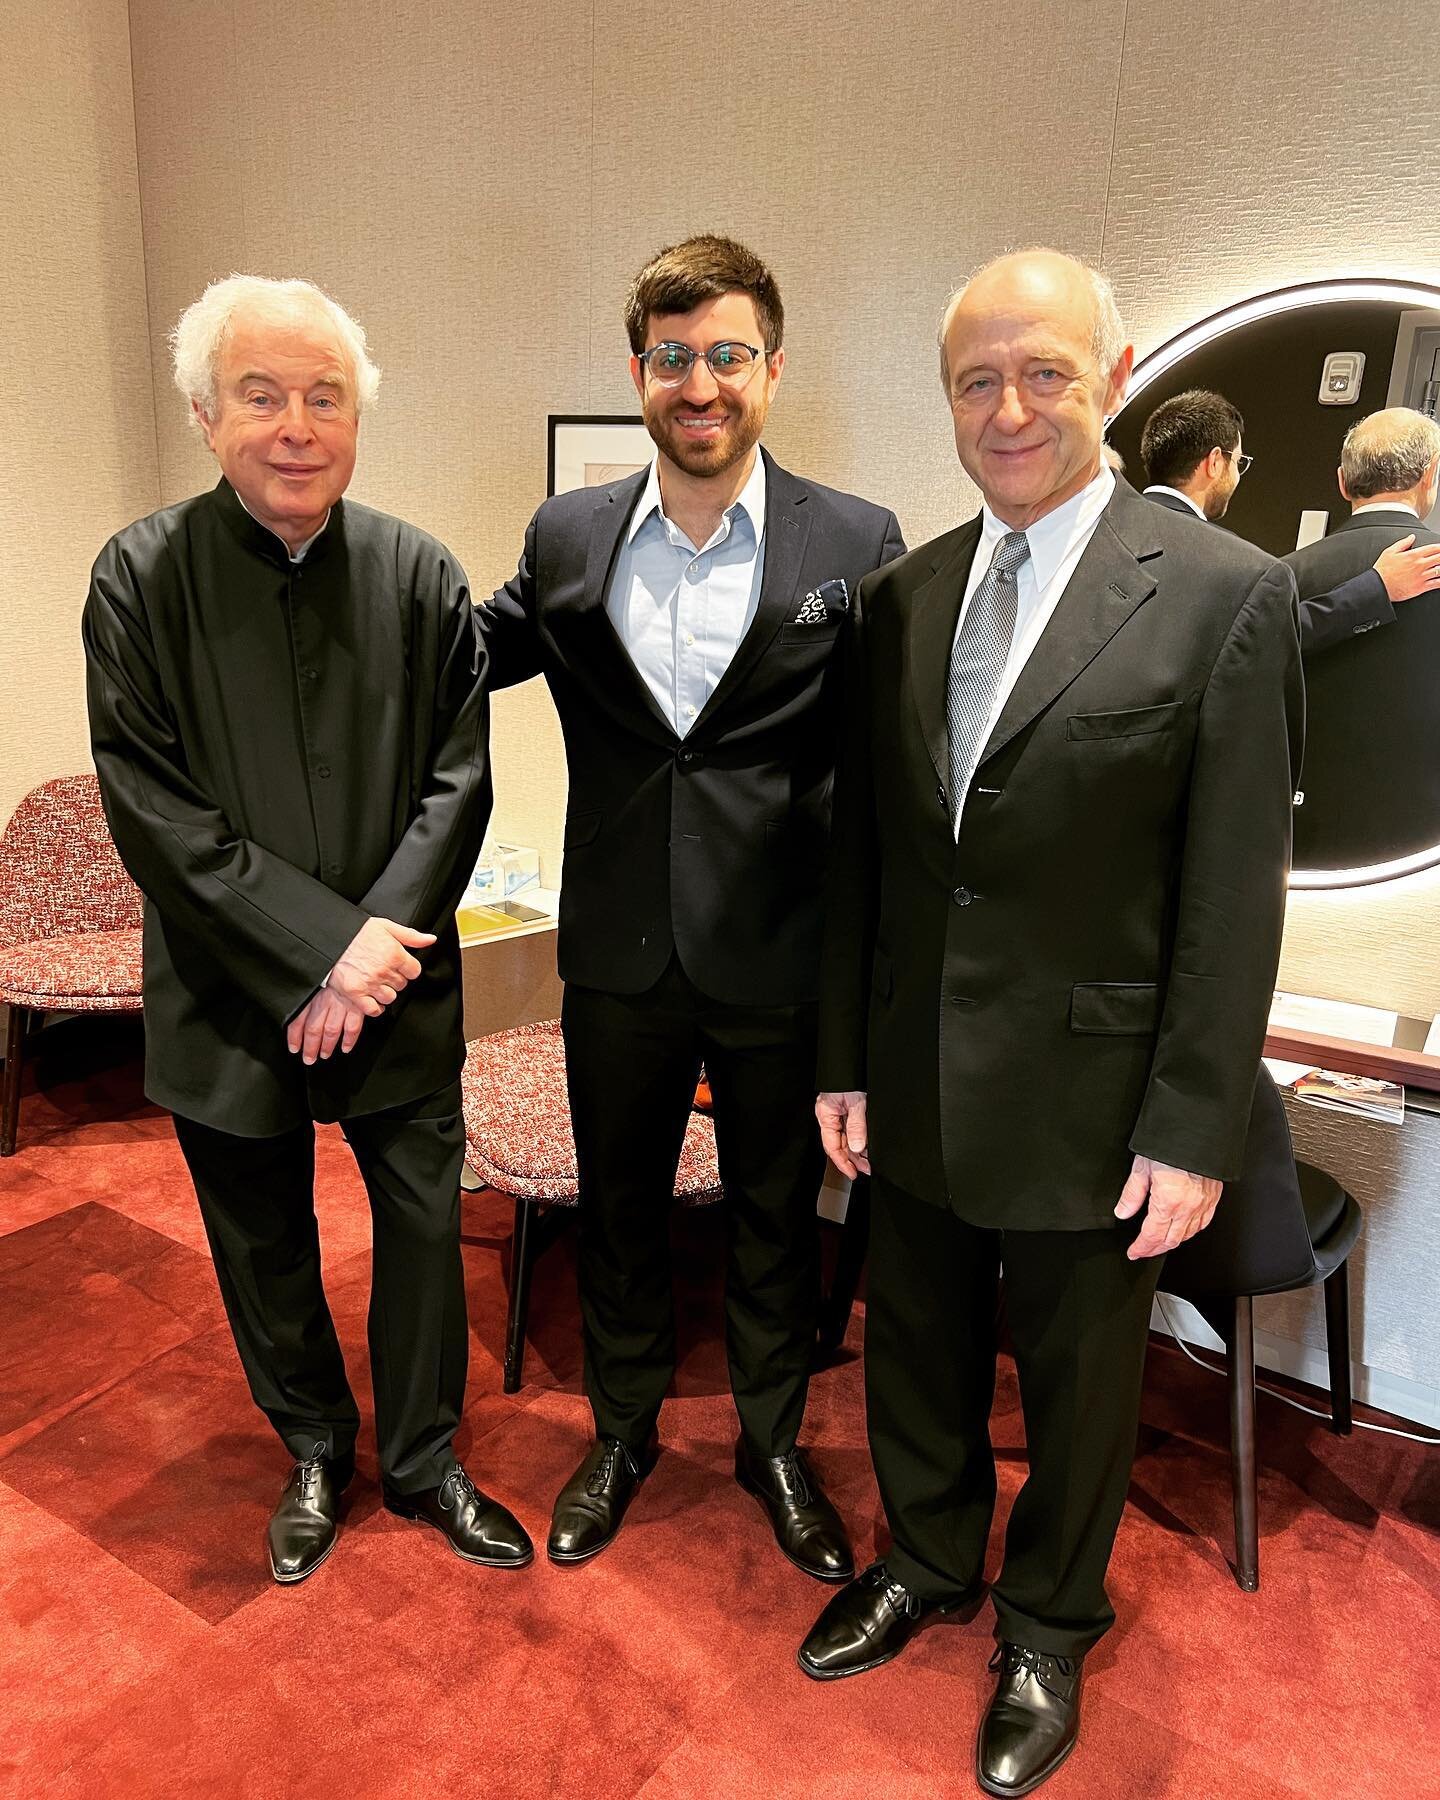 Wrapping up two wonderful weeks in New York with the @nyphilharmonic , assisting these two extraordinary musicians: Sir Andr&aacute;s Schiff and Iv&aacute;n Fischer!

#conductor #orchestra #opus3artists #nyphil #nyc #lincolncenter #andrasschiff #ivan